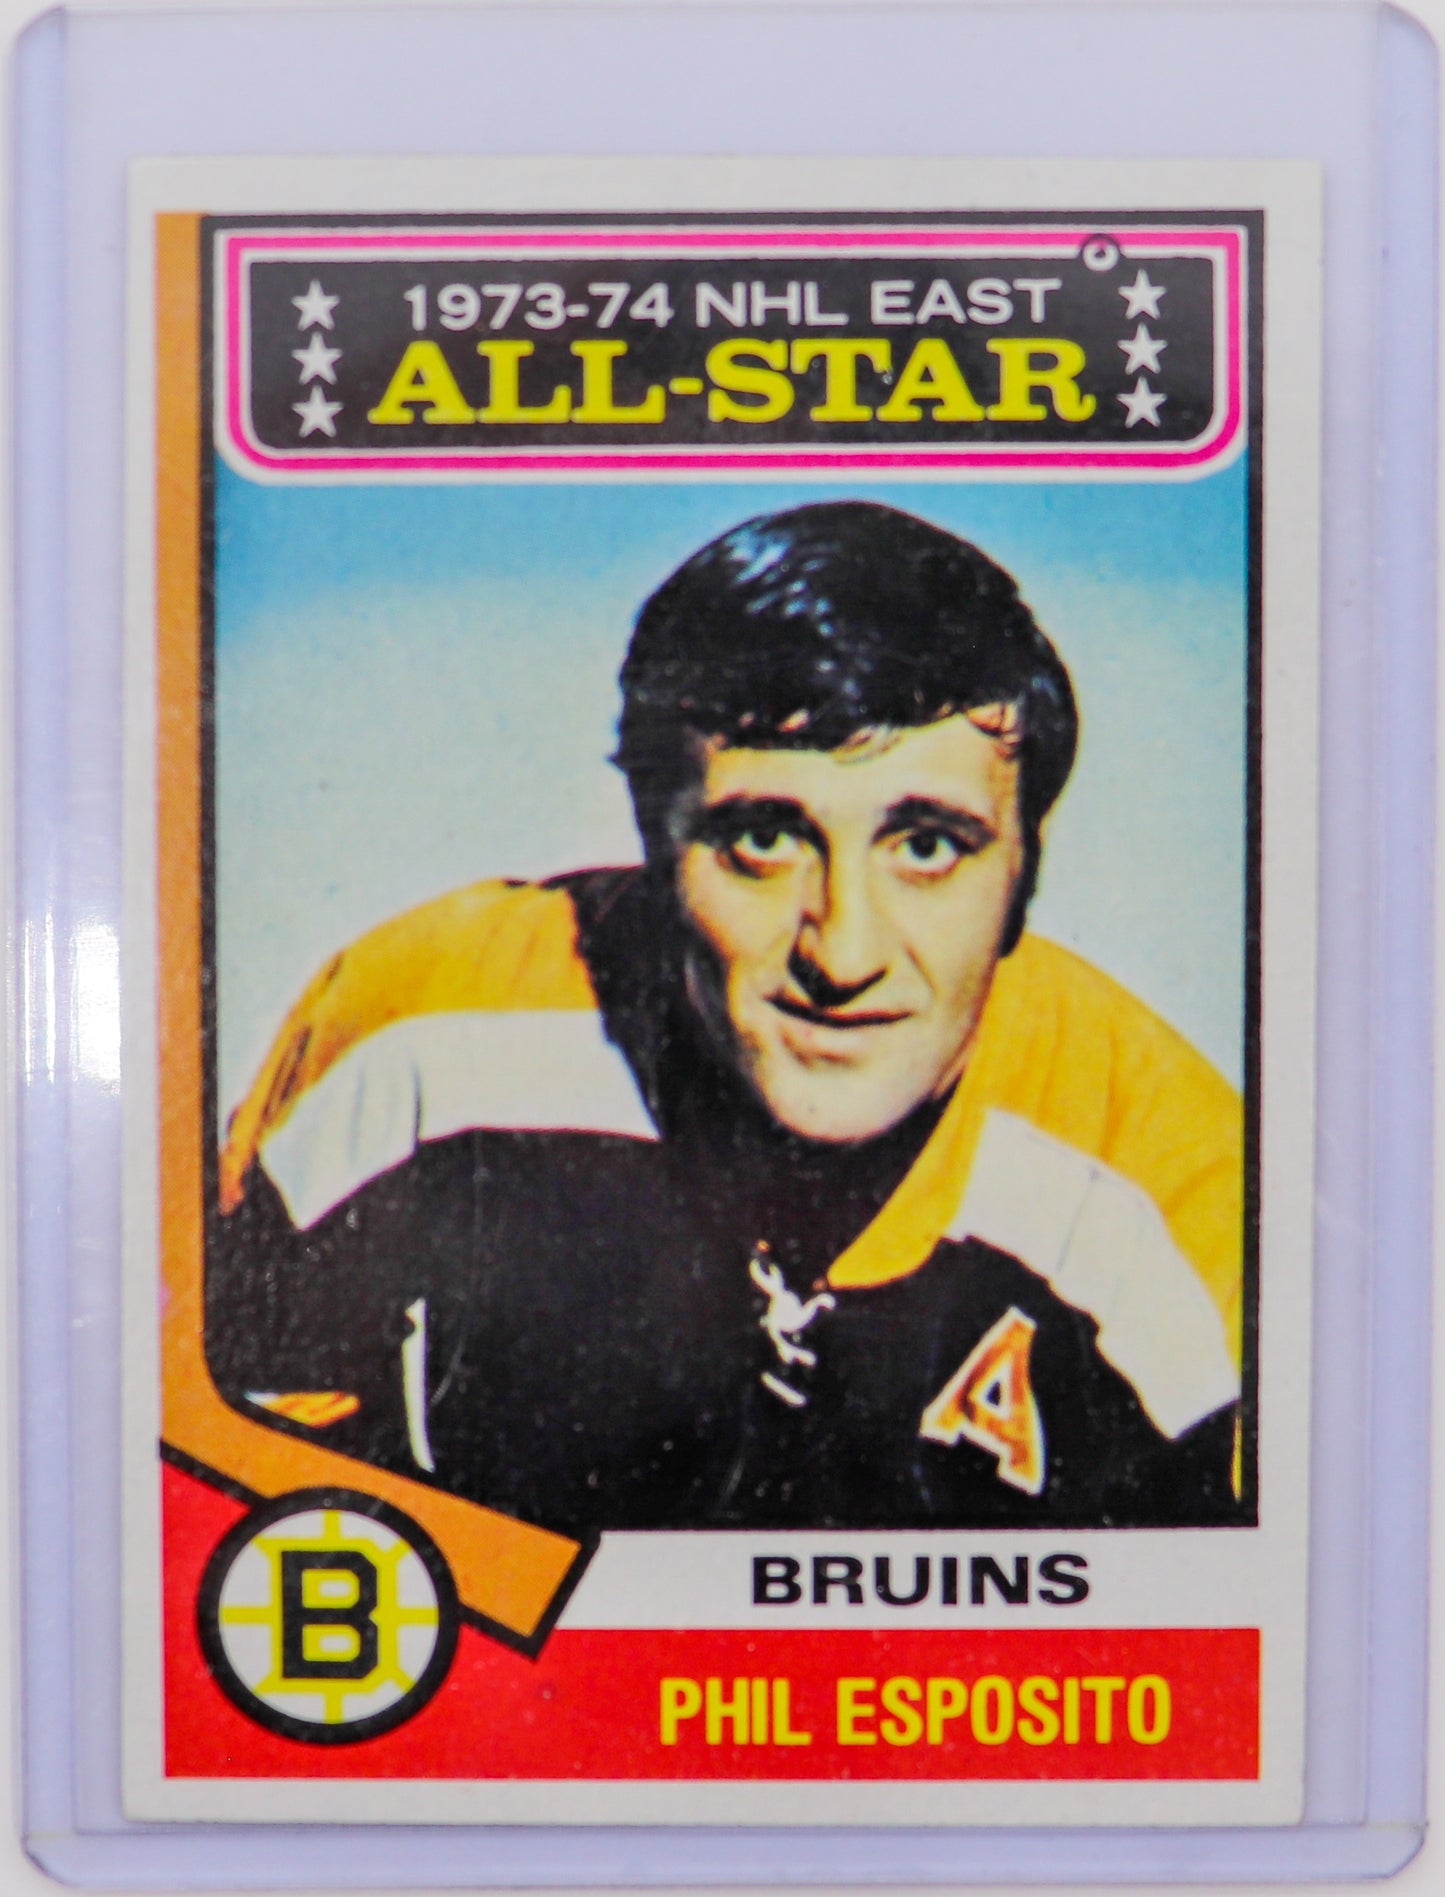 1973 Topps Phil Esposito NHL All-Star #129, Very Good